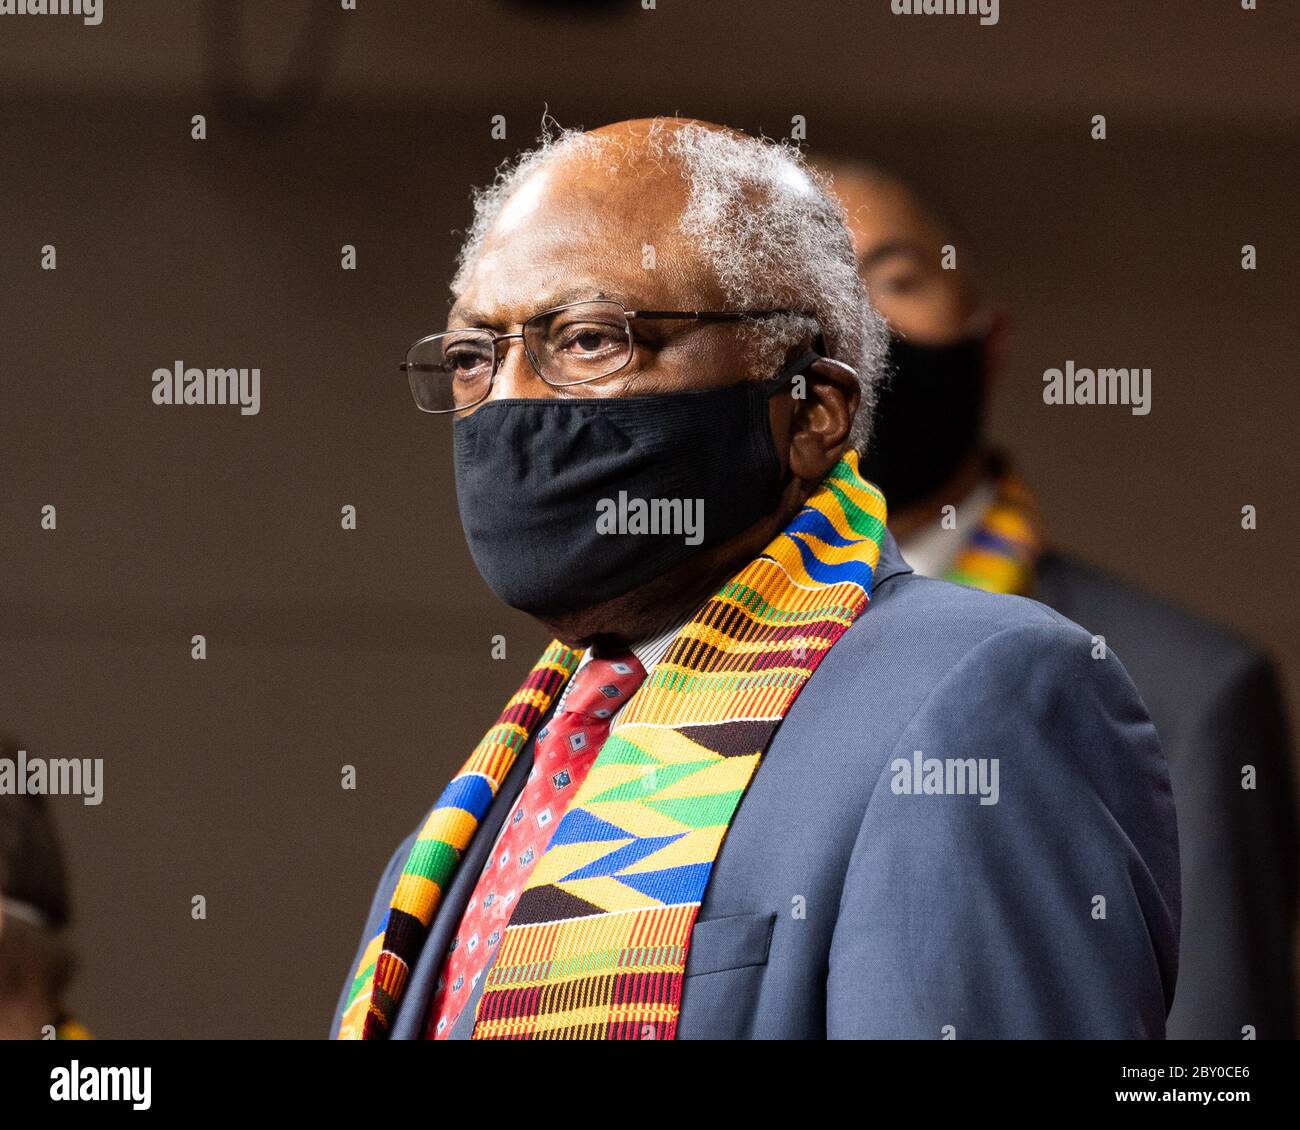 U.S. Representative Jim Clyburn (D-SC) attends a press conference with Congressional Democrats unveiling policing reform and equal justice legislation in Washington. Stock Photo